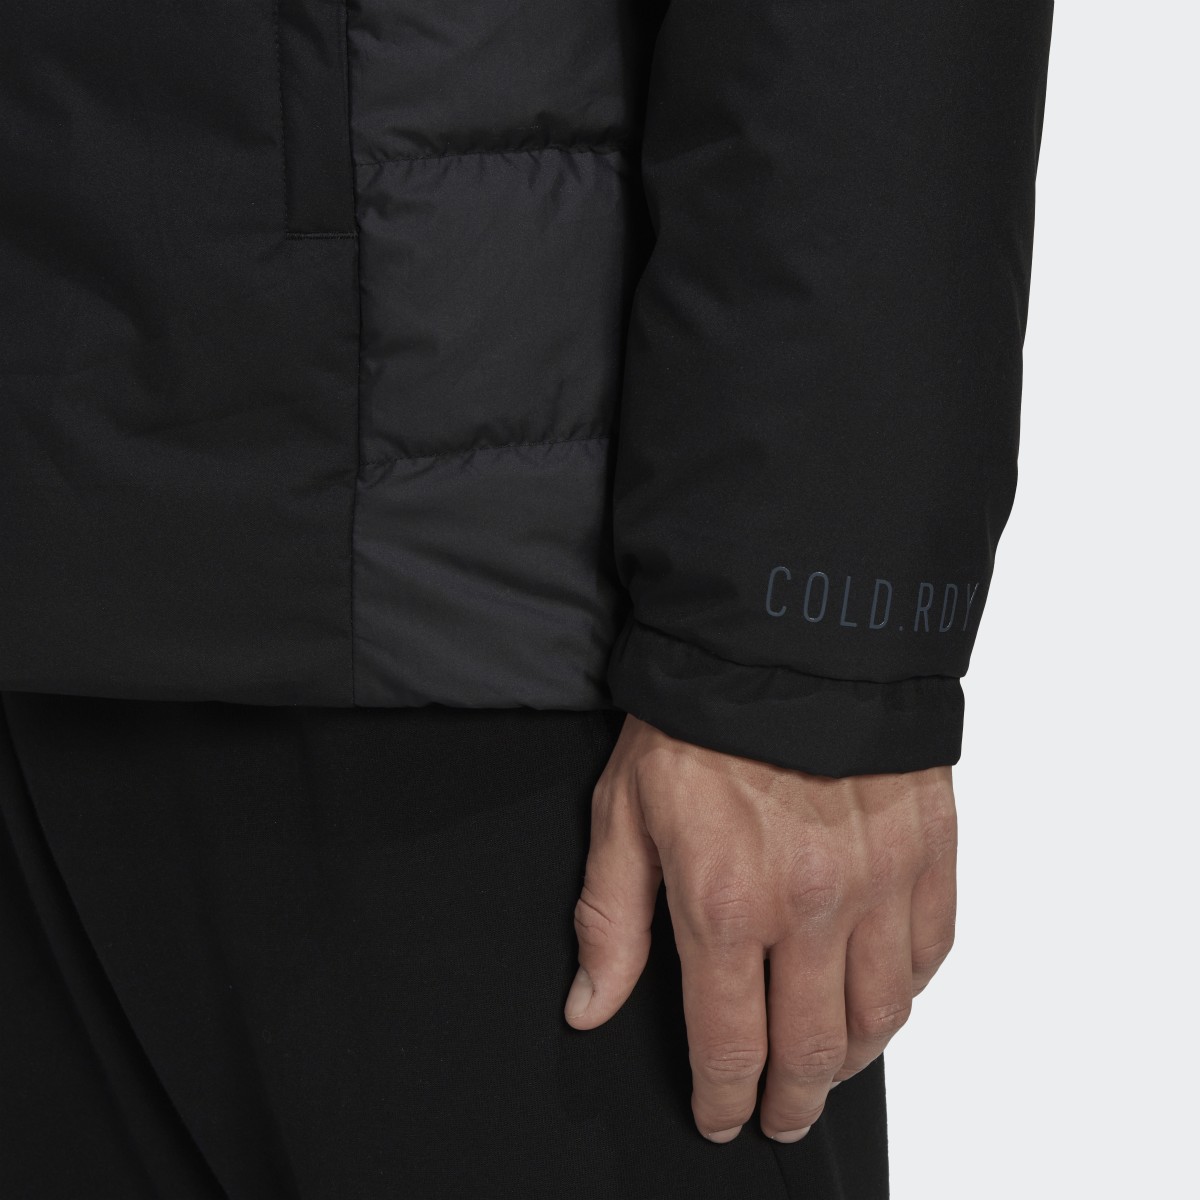 Adidas Traveer COLD.RDY Jacket. 9